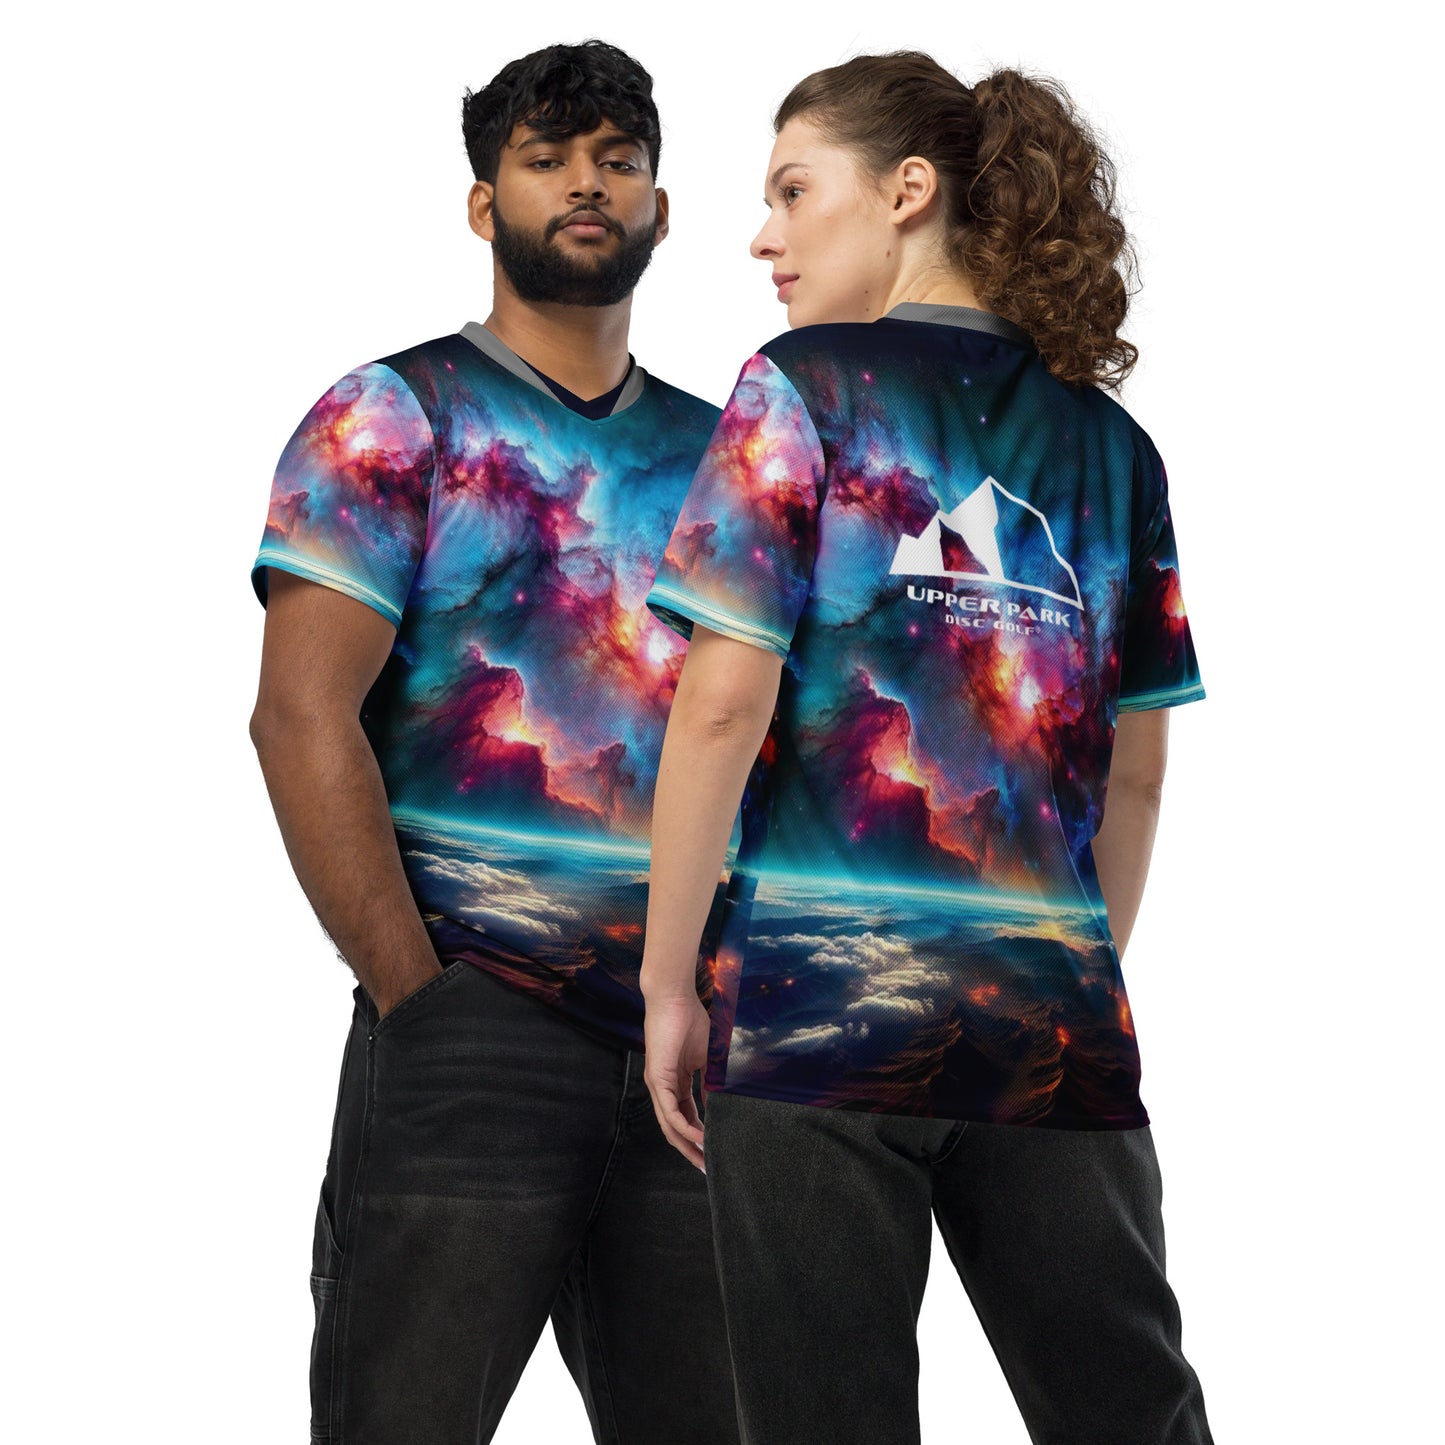 Cosmic Nebula Recycled Unisex Sports Jersey front and back